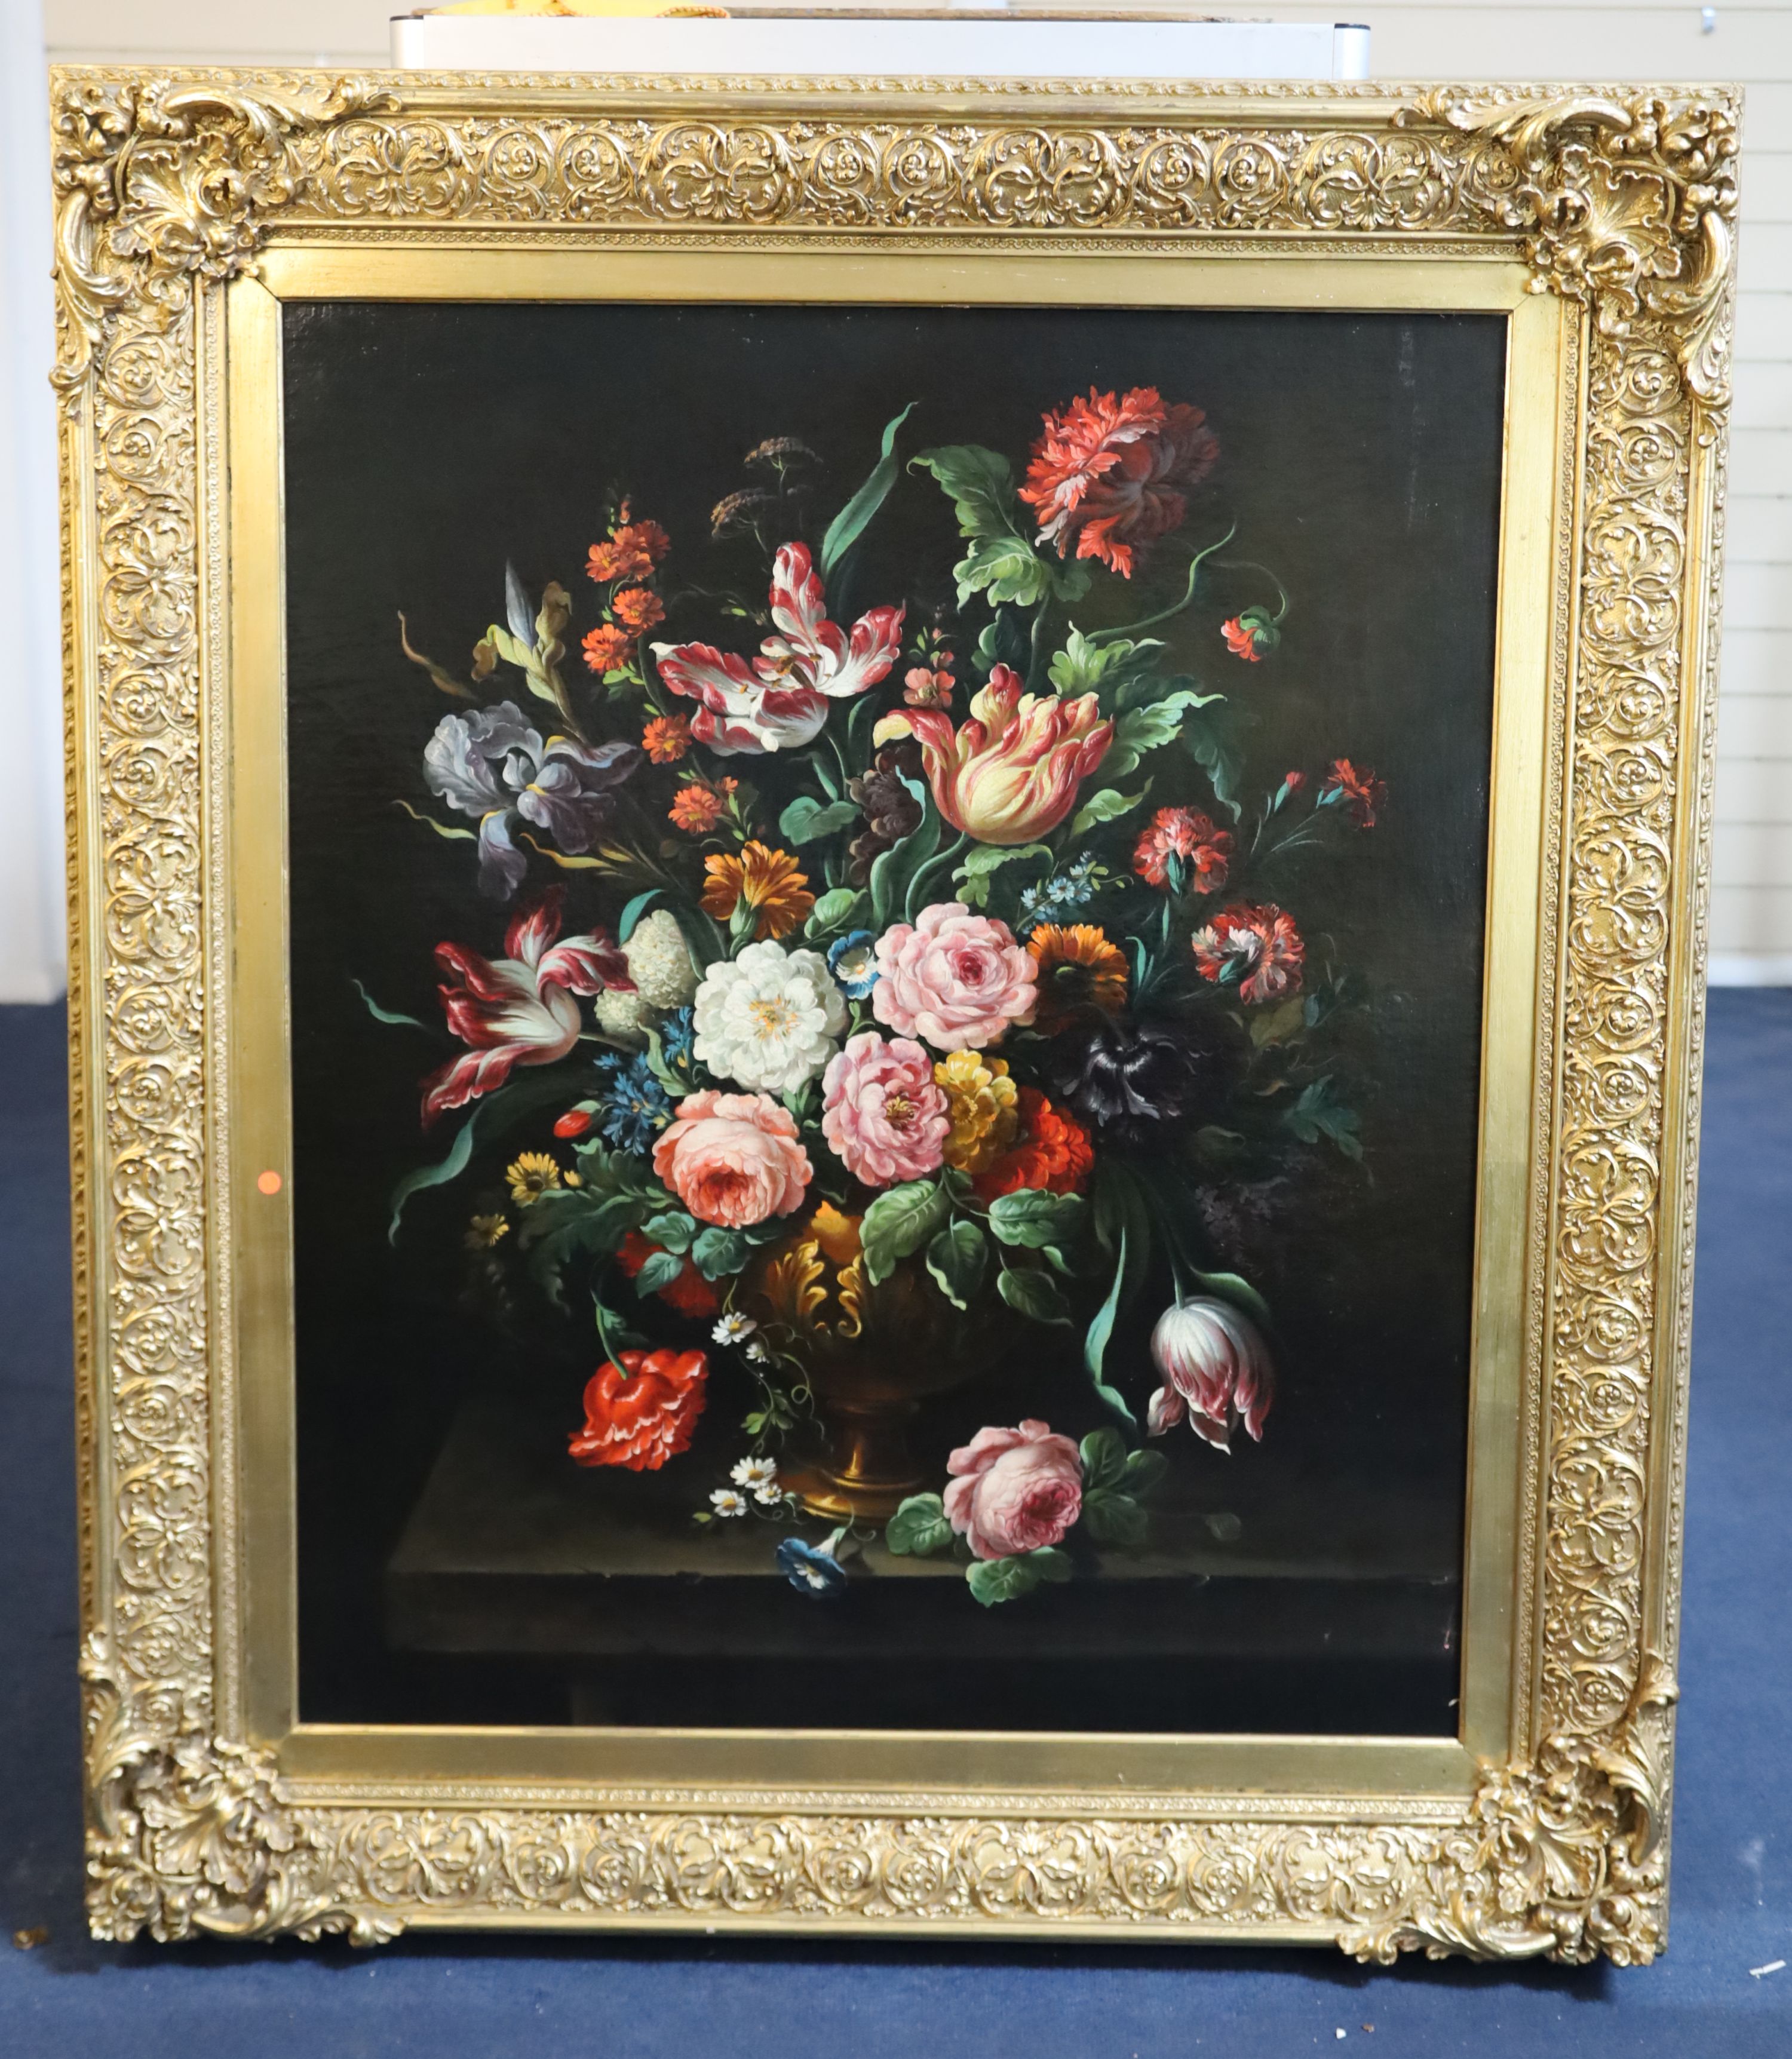 17th century Dutch style Still life of flowers in an urn upon a ledge 35 x 29in.